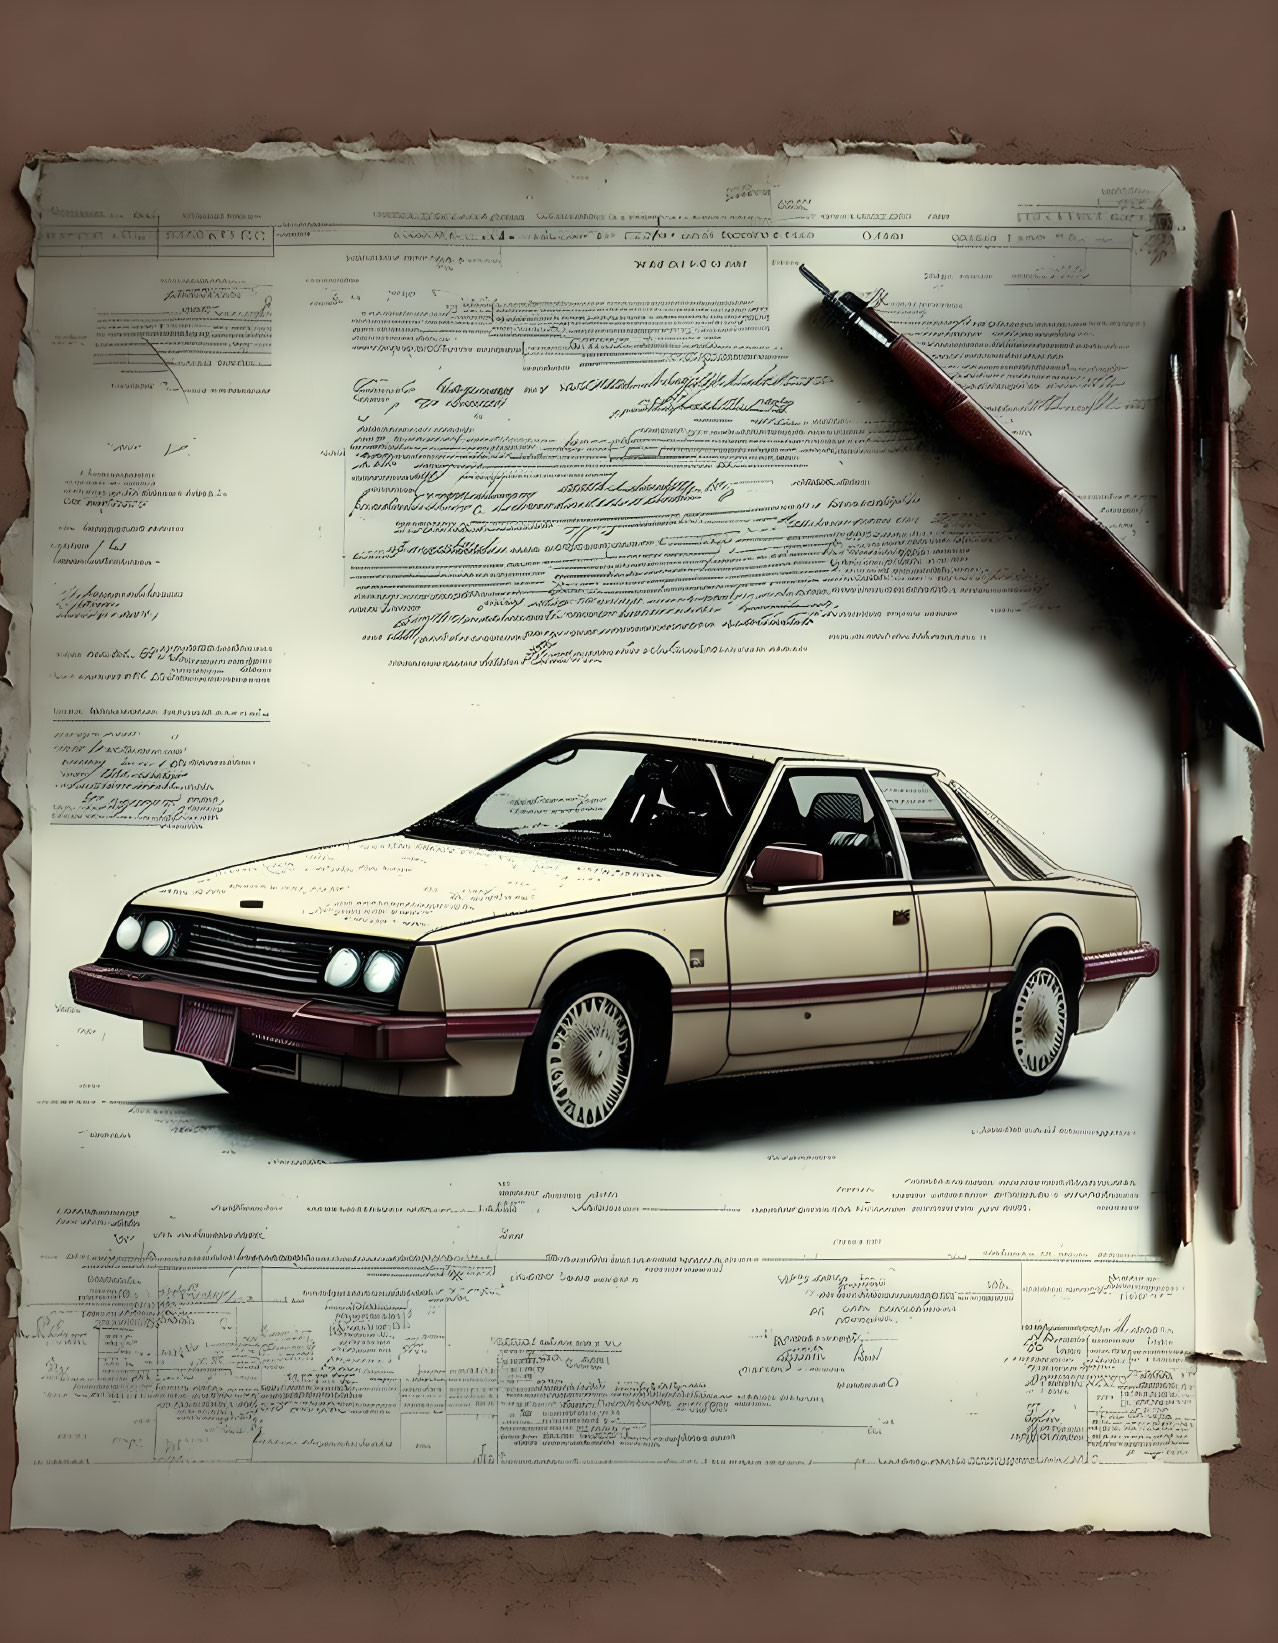 Detailed vintage car illustration with schematics and notes on aged documents.